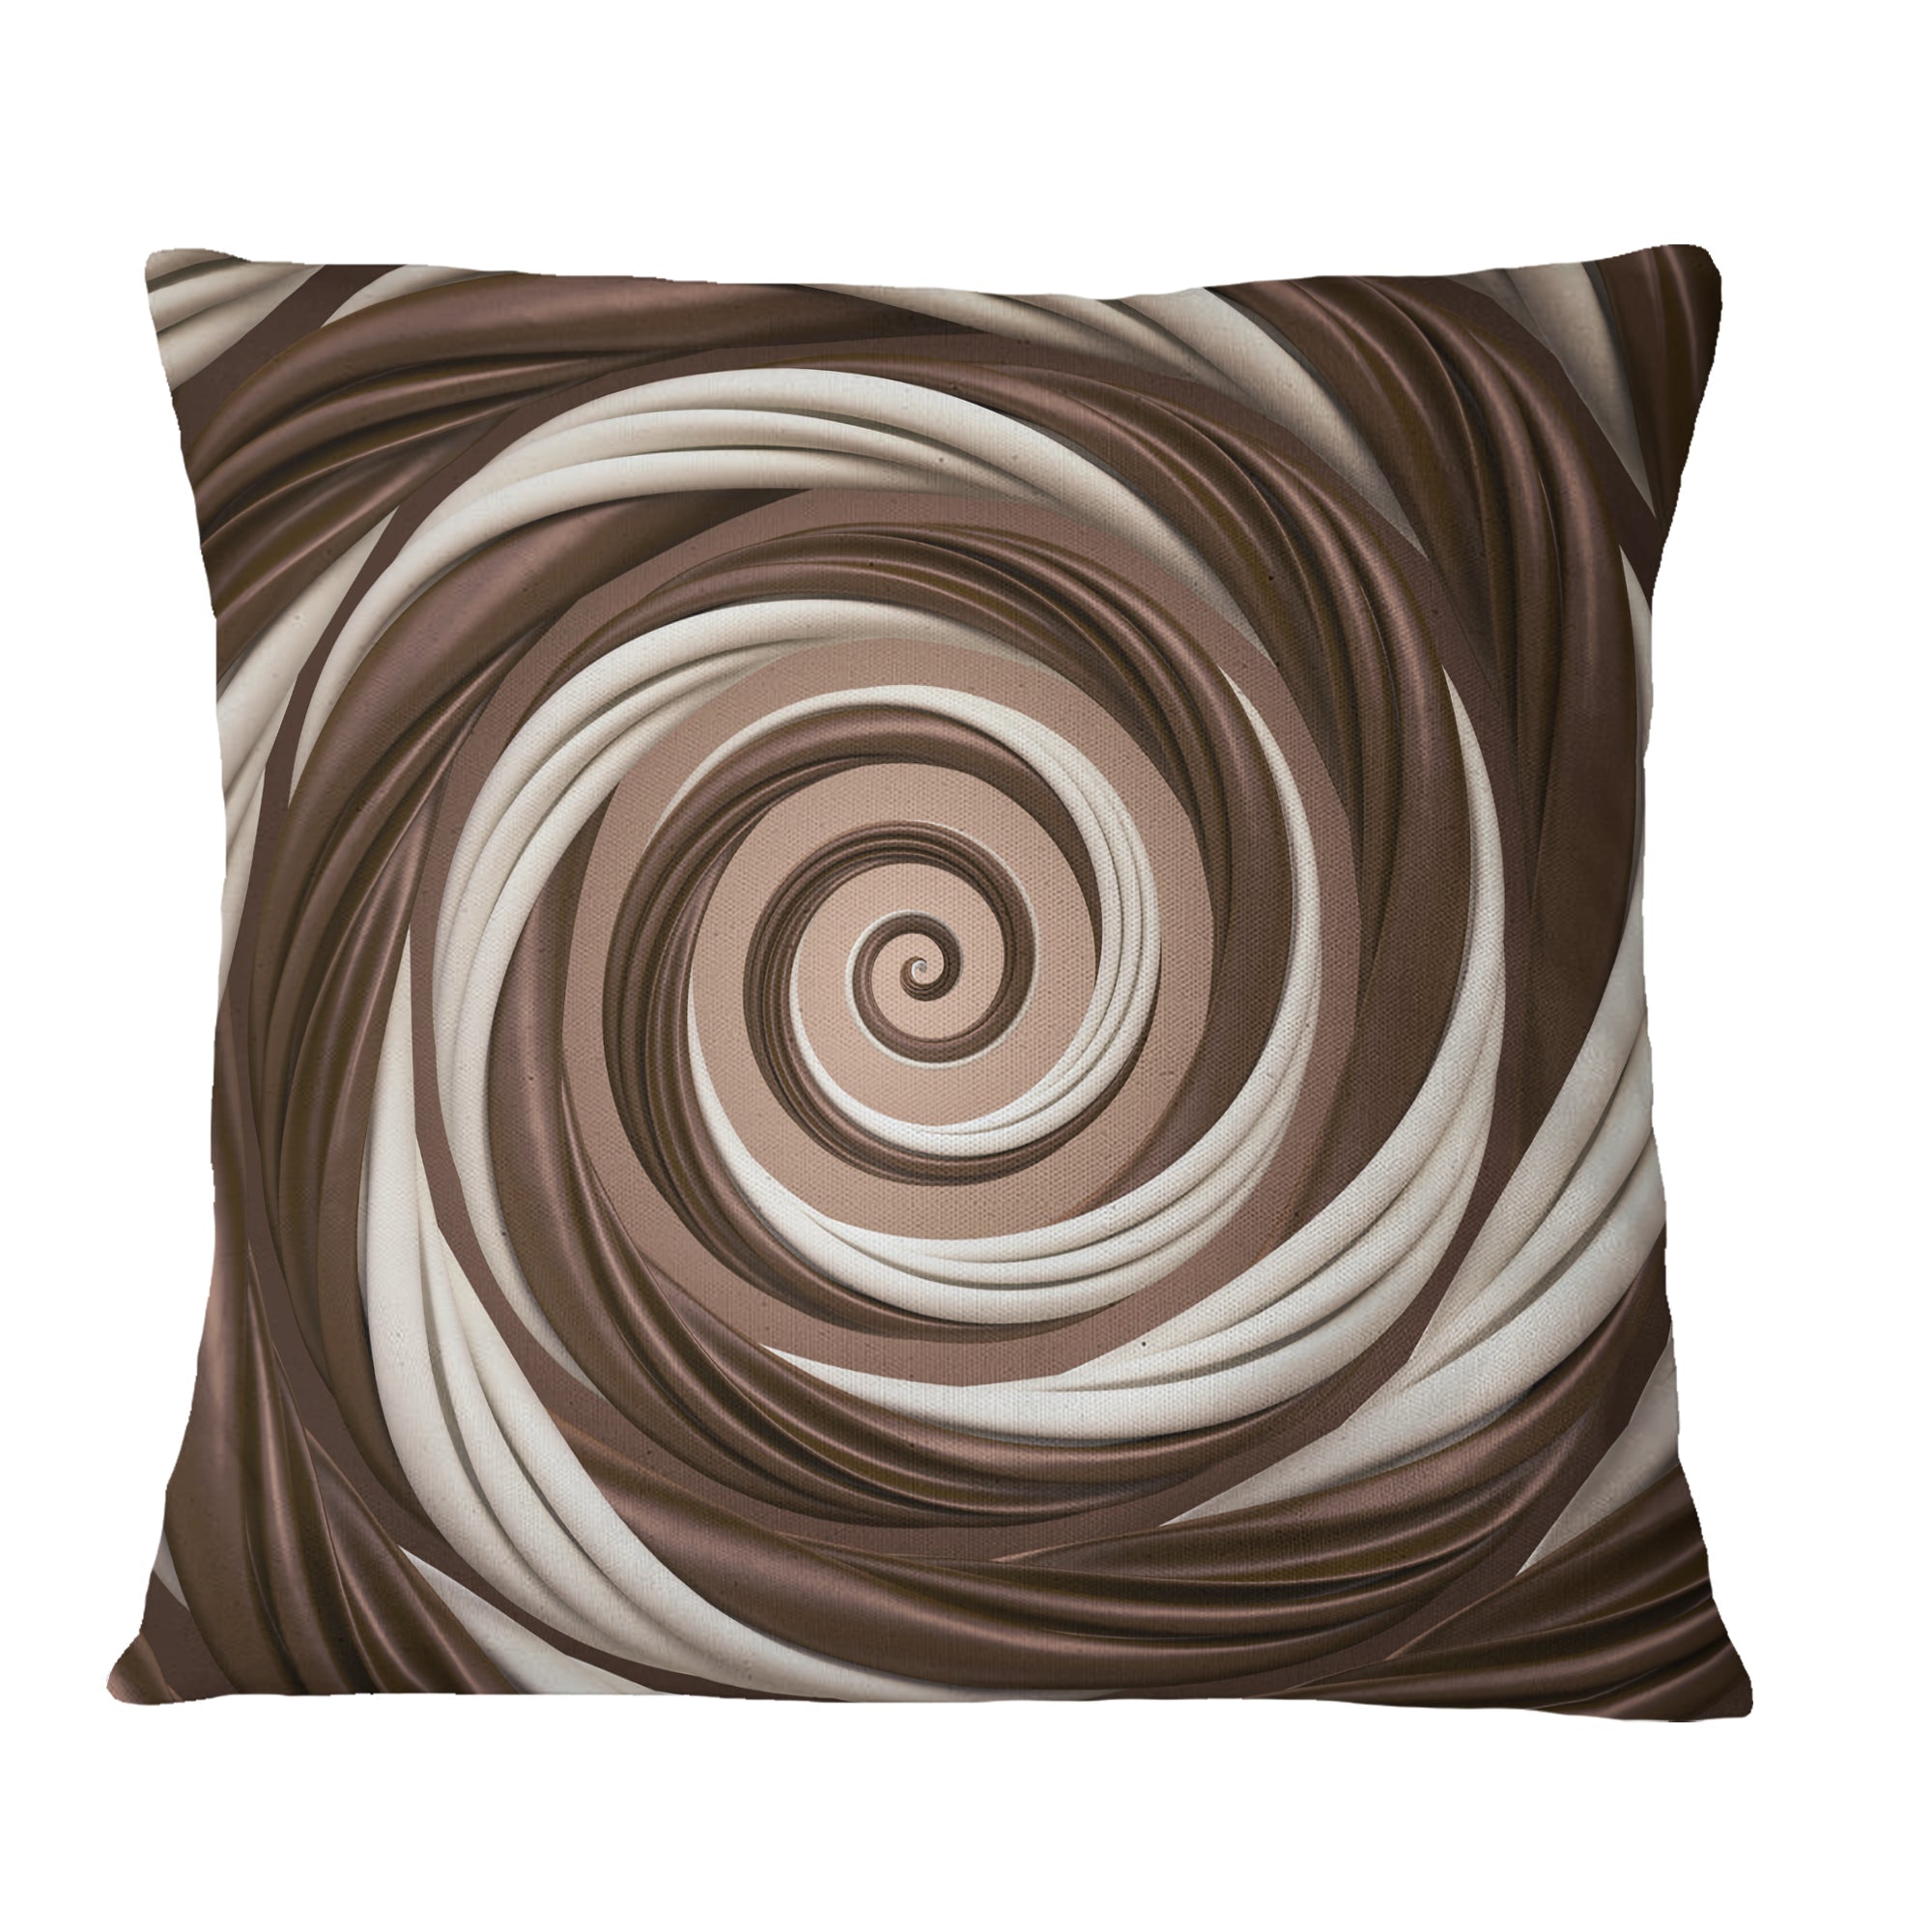 Chocolate and Milk Candy Spiral Design - Abstract Throw Pillow